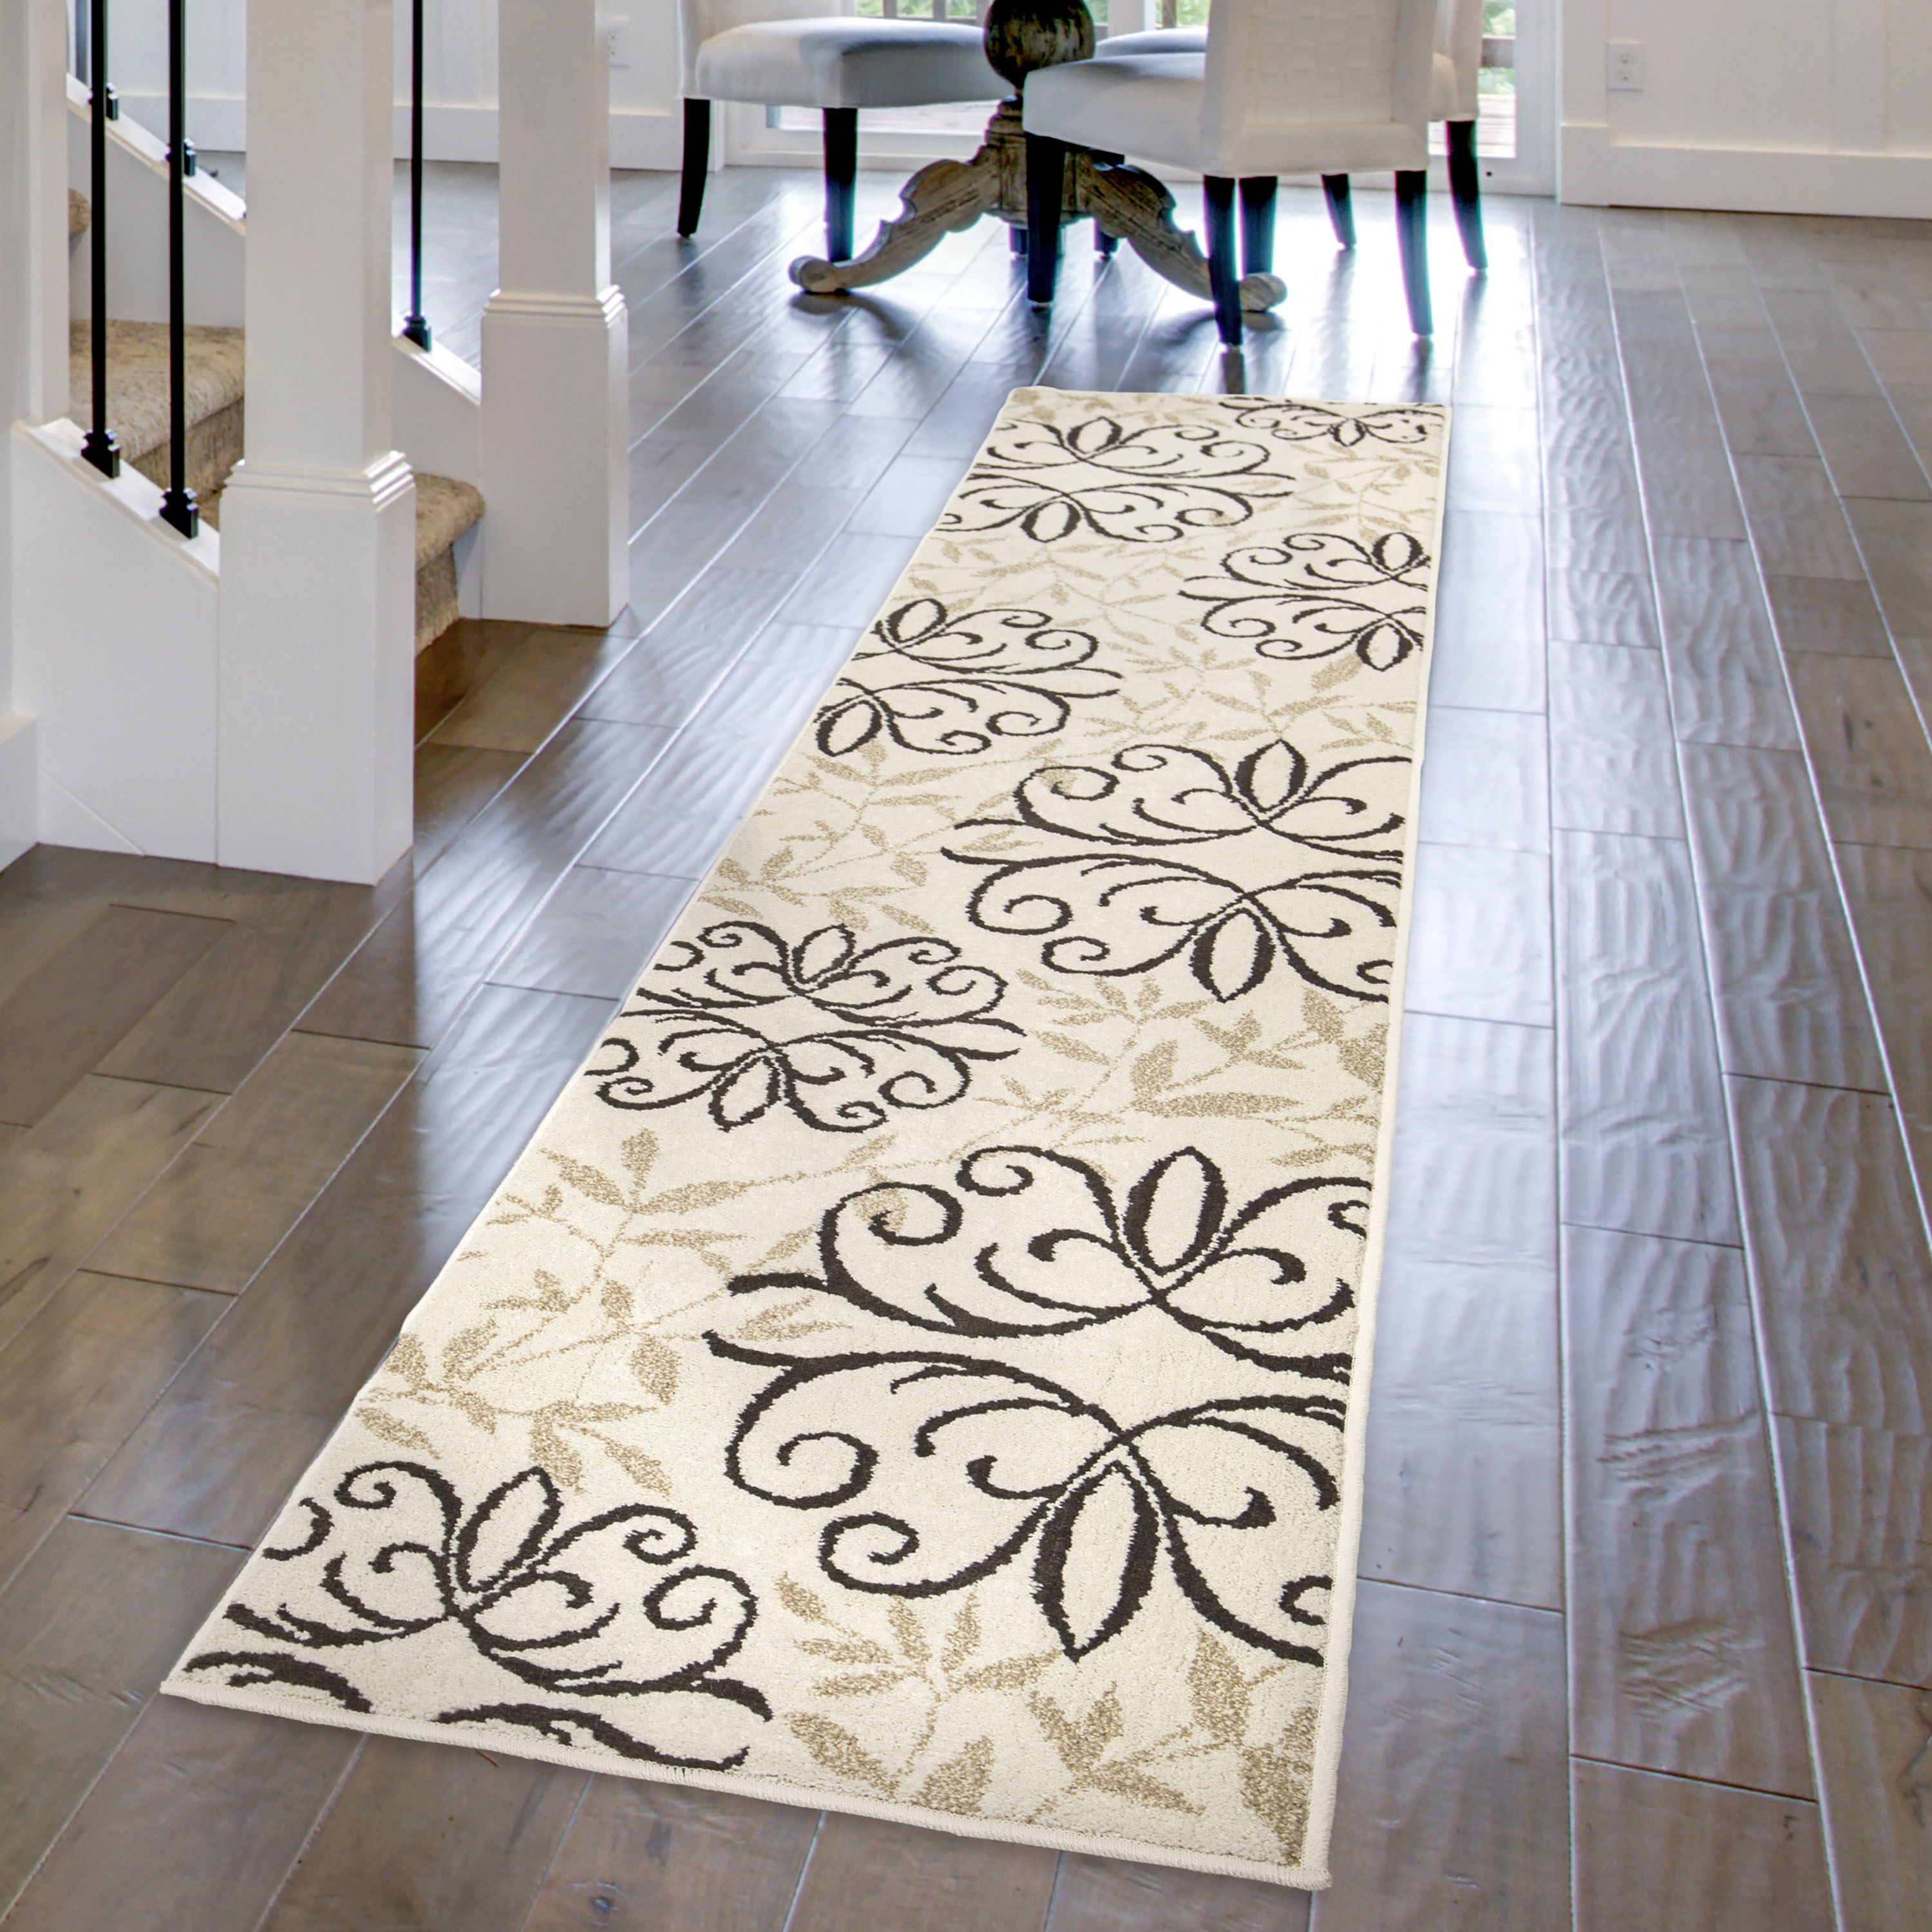 The taupe and brown rug in runner-size